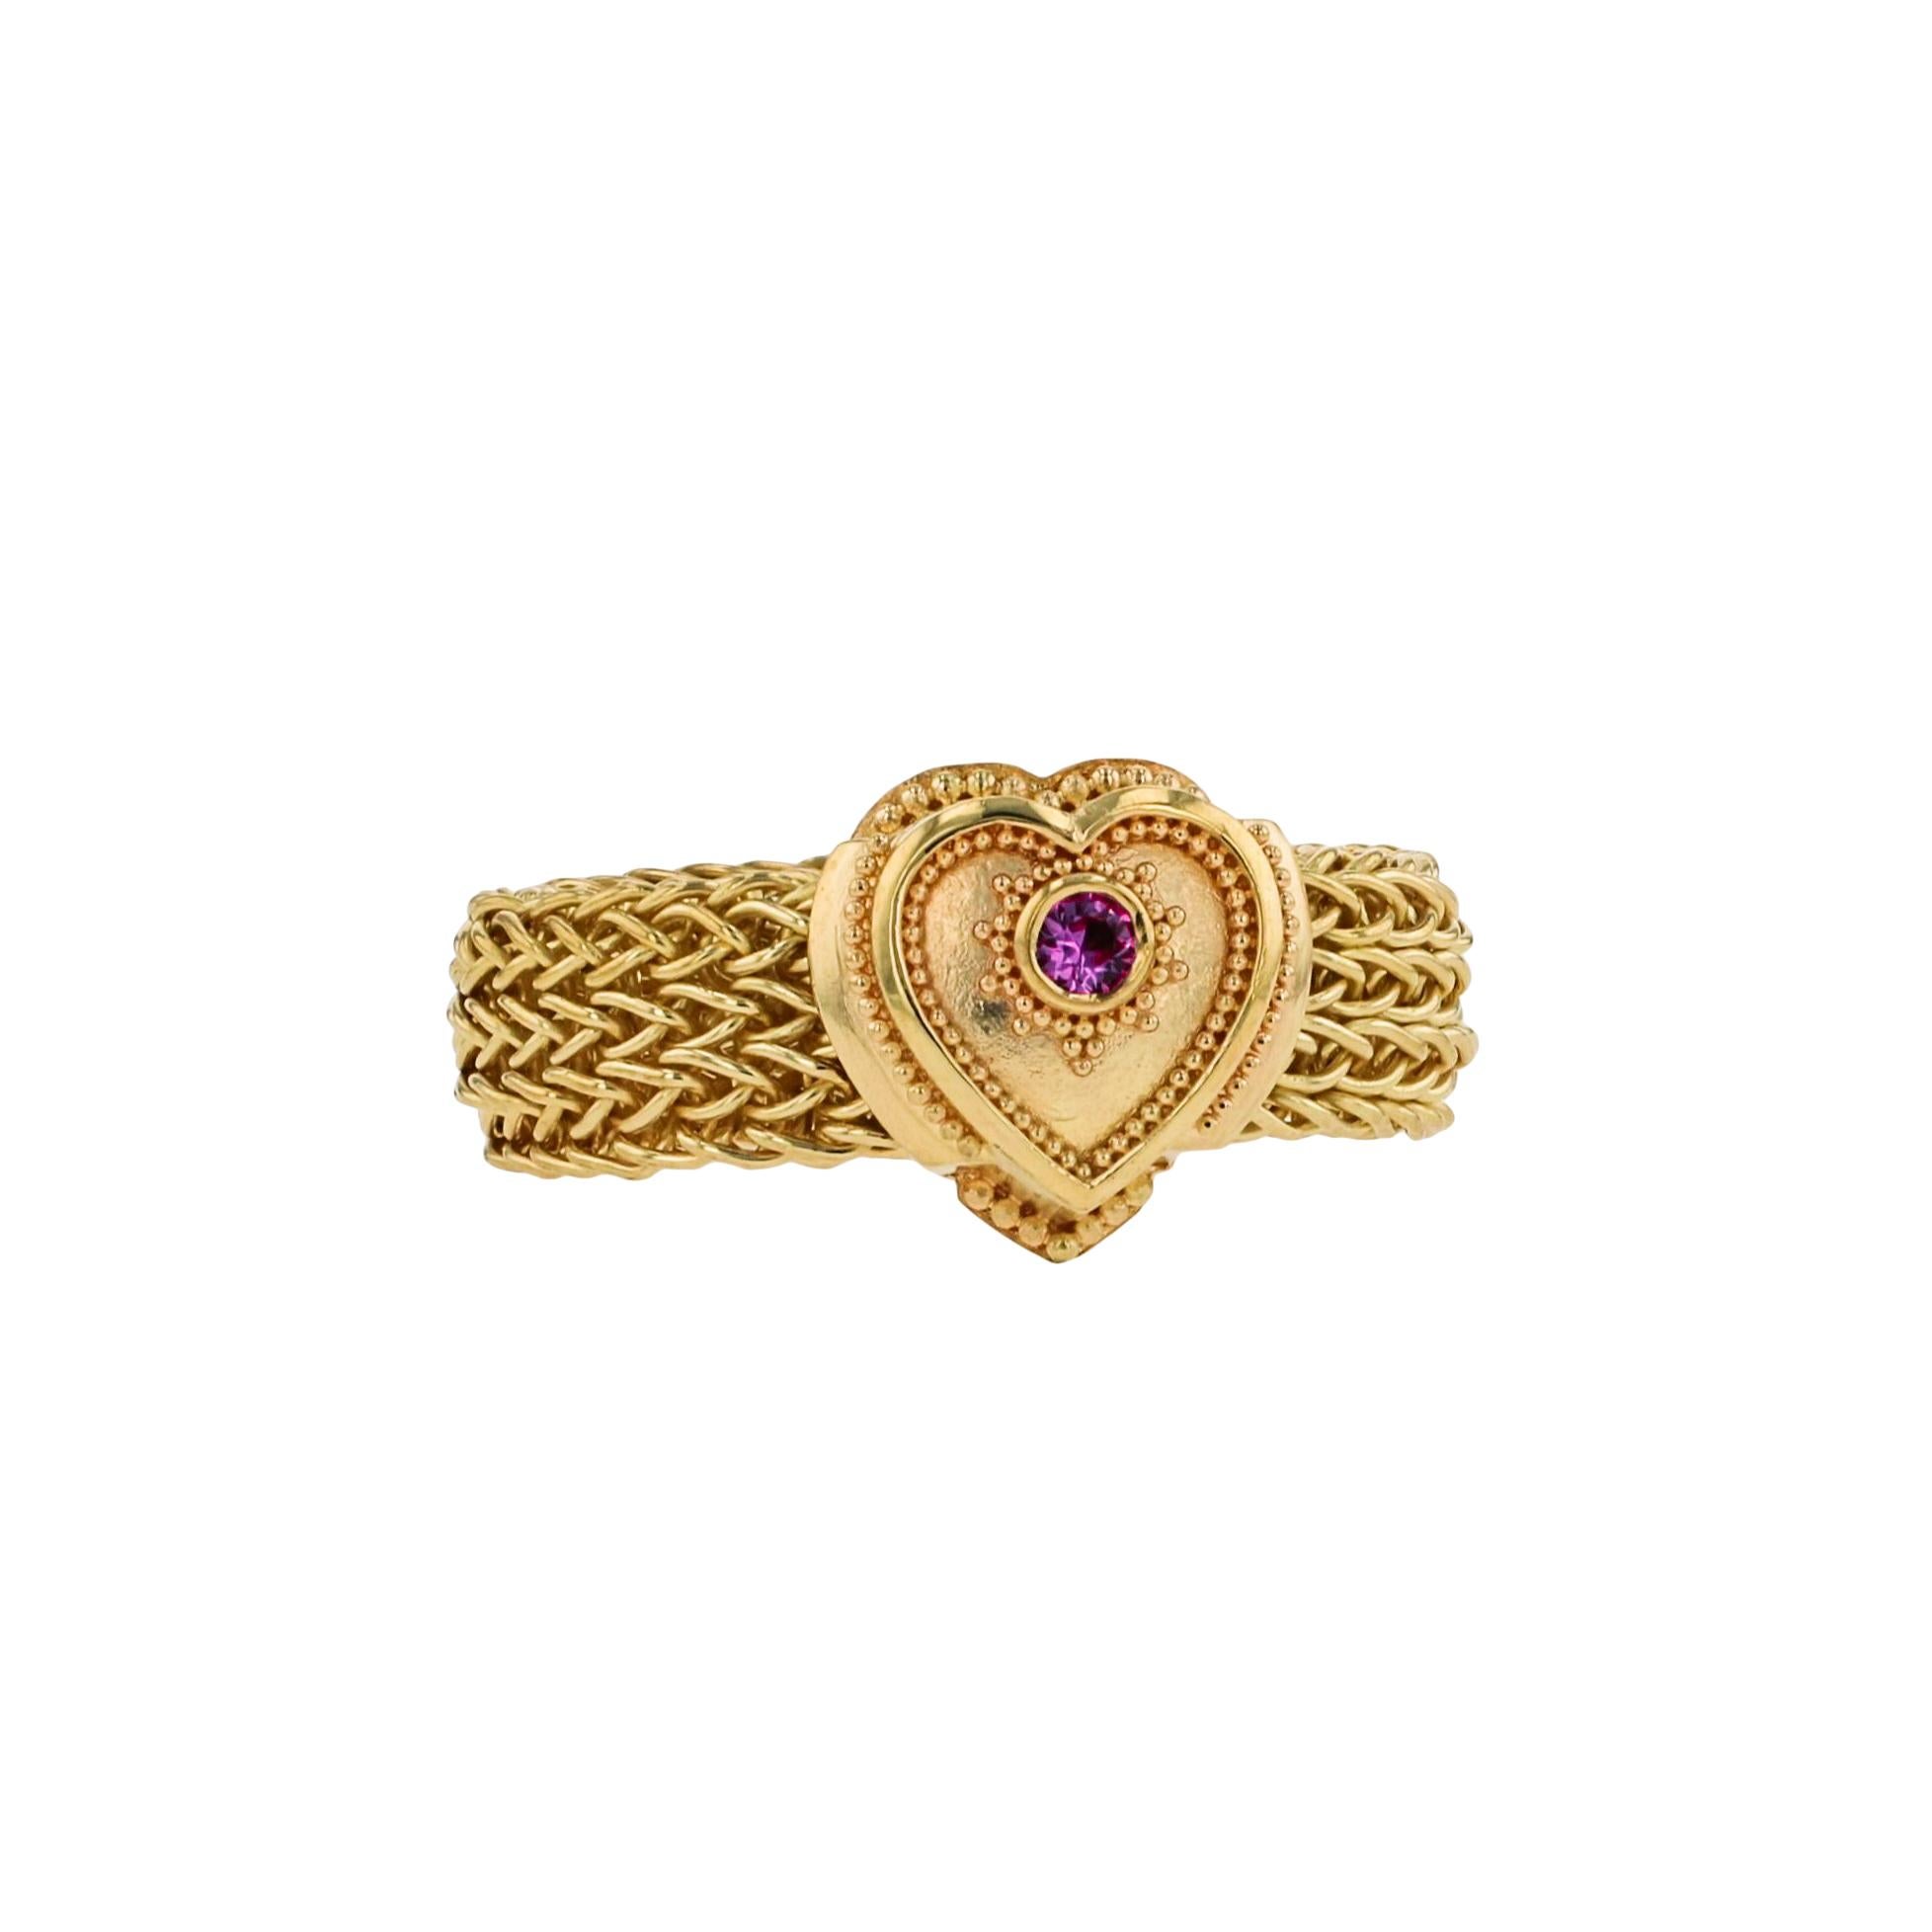 Show your love with Kent Raible's heart shaped ring set with a lovely Pink Sapphire! This solitaire ring features Raible's fine granulation, and a flexible hand woven chain band!

Pink Sapphire .07ct
9.8 grams 18 karat Gold

Size 8 1/4
This ring is